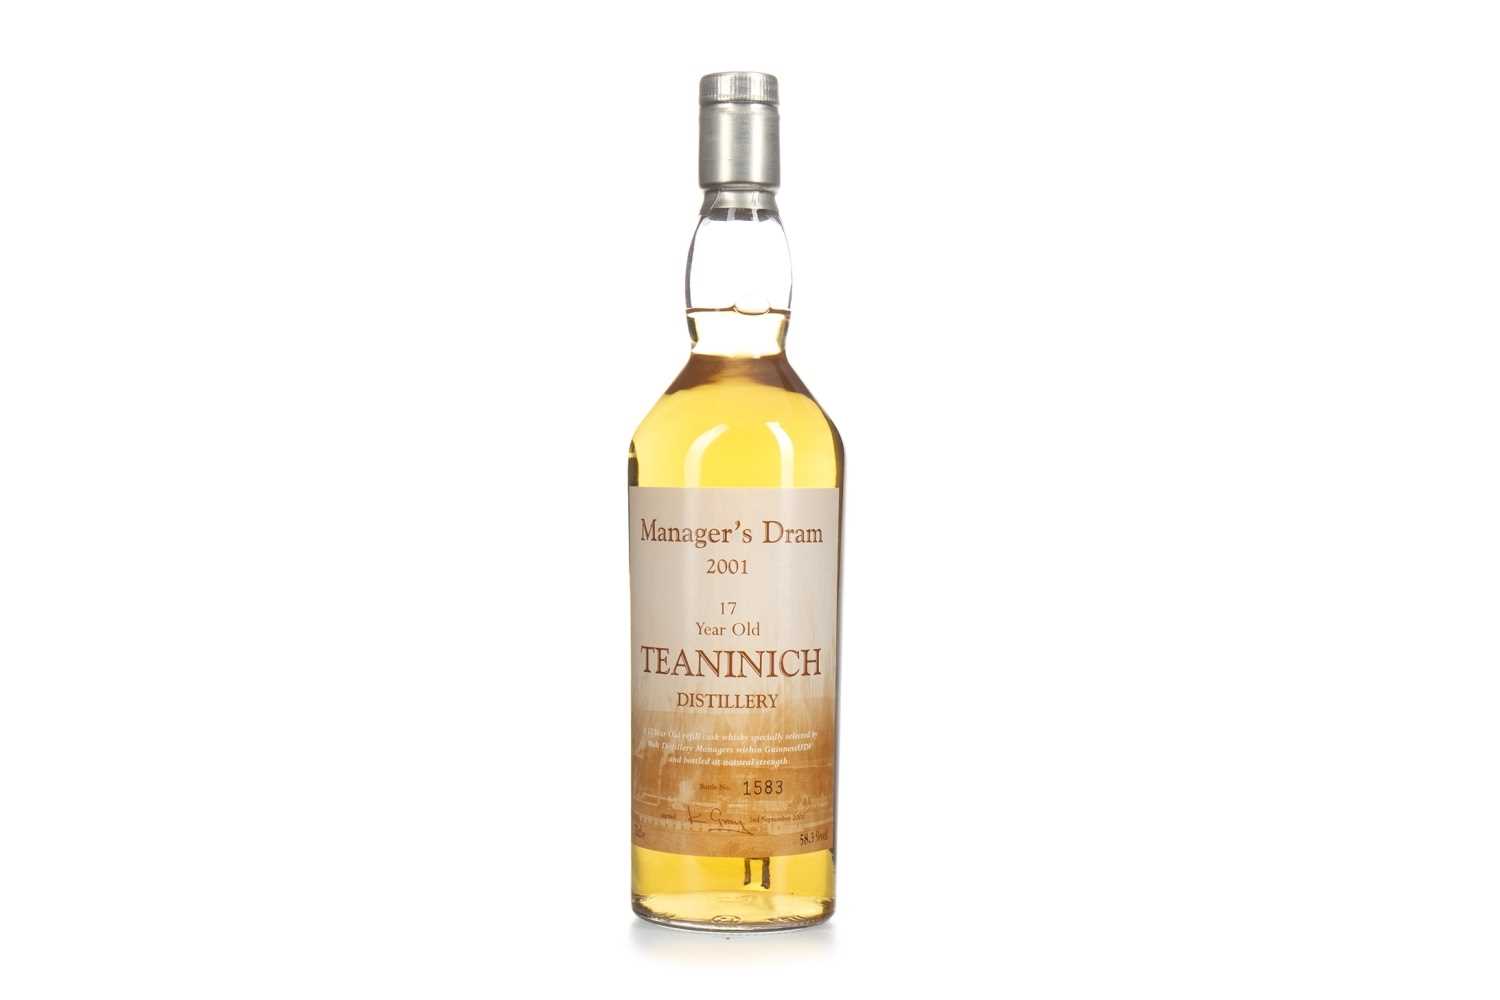 Lot 18 - TEANINICH THE MANAGER'S DRAM AGED 17 YEARS